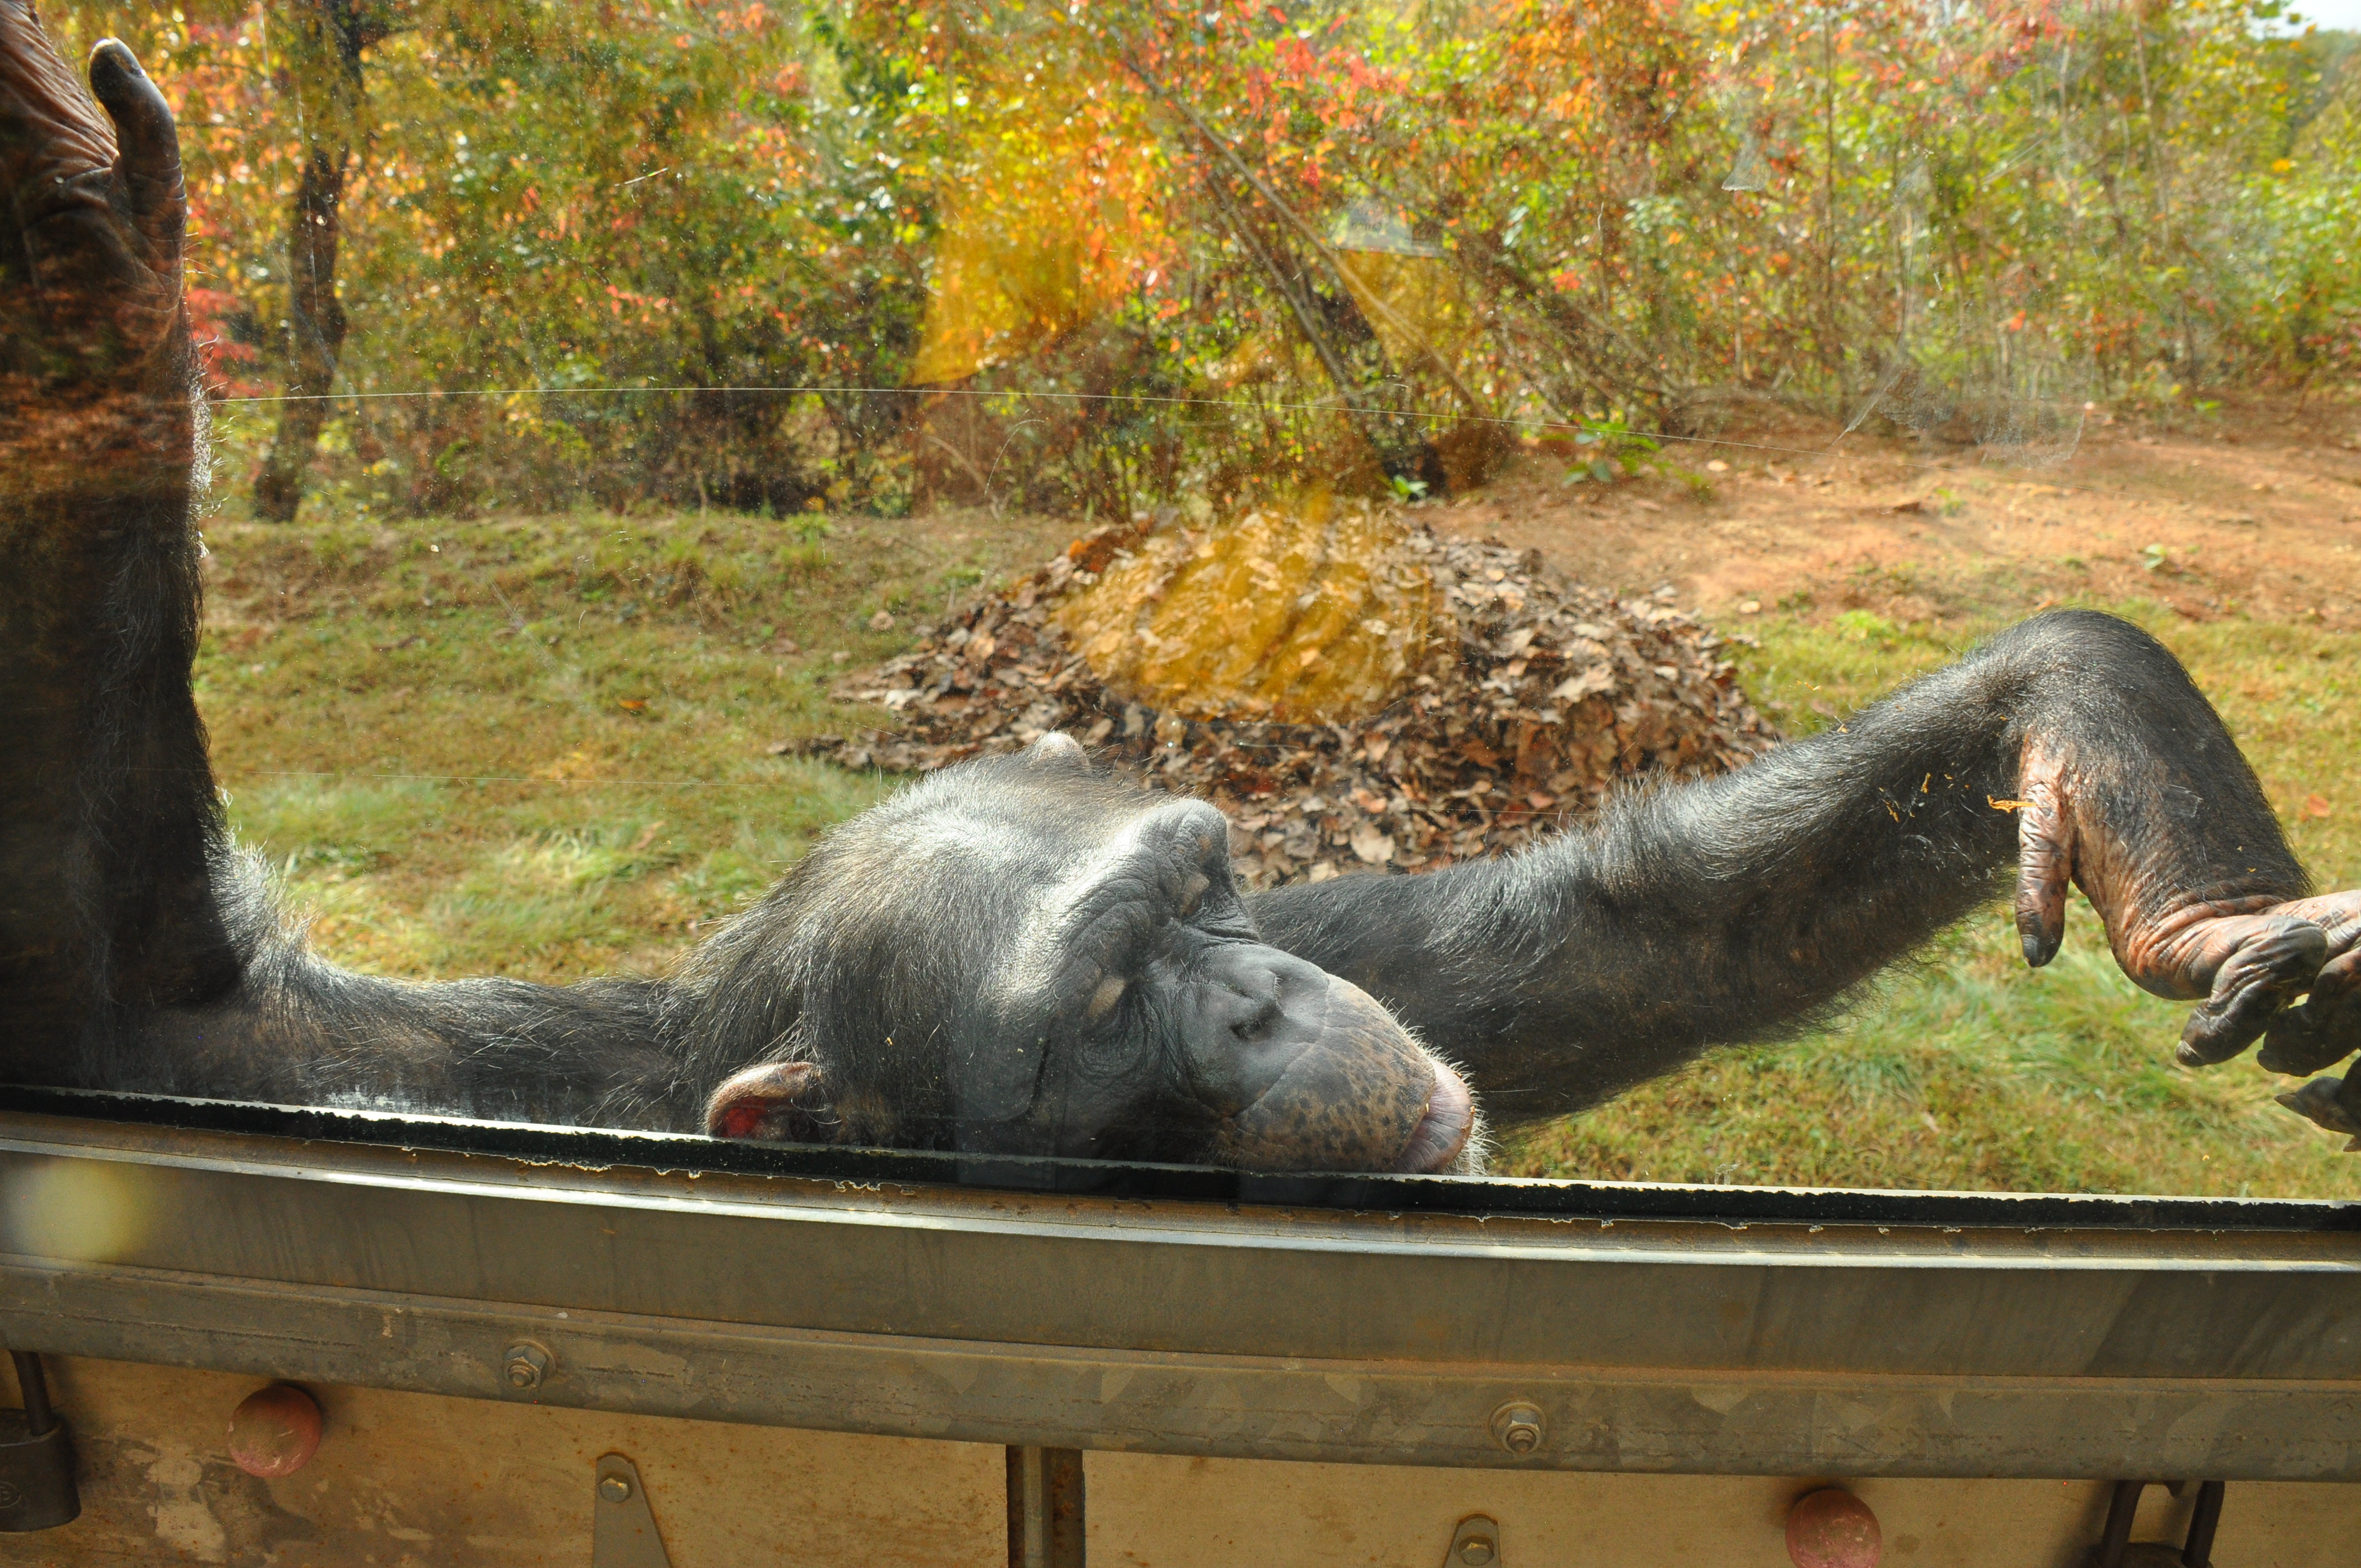 chimpanzee looking out a window